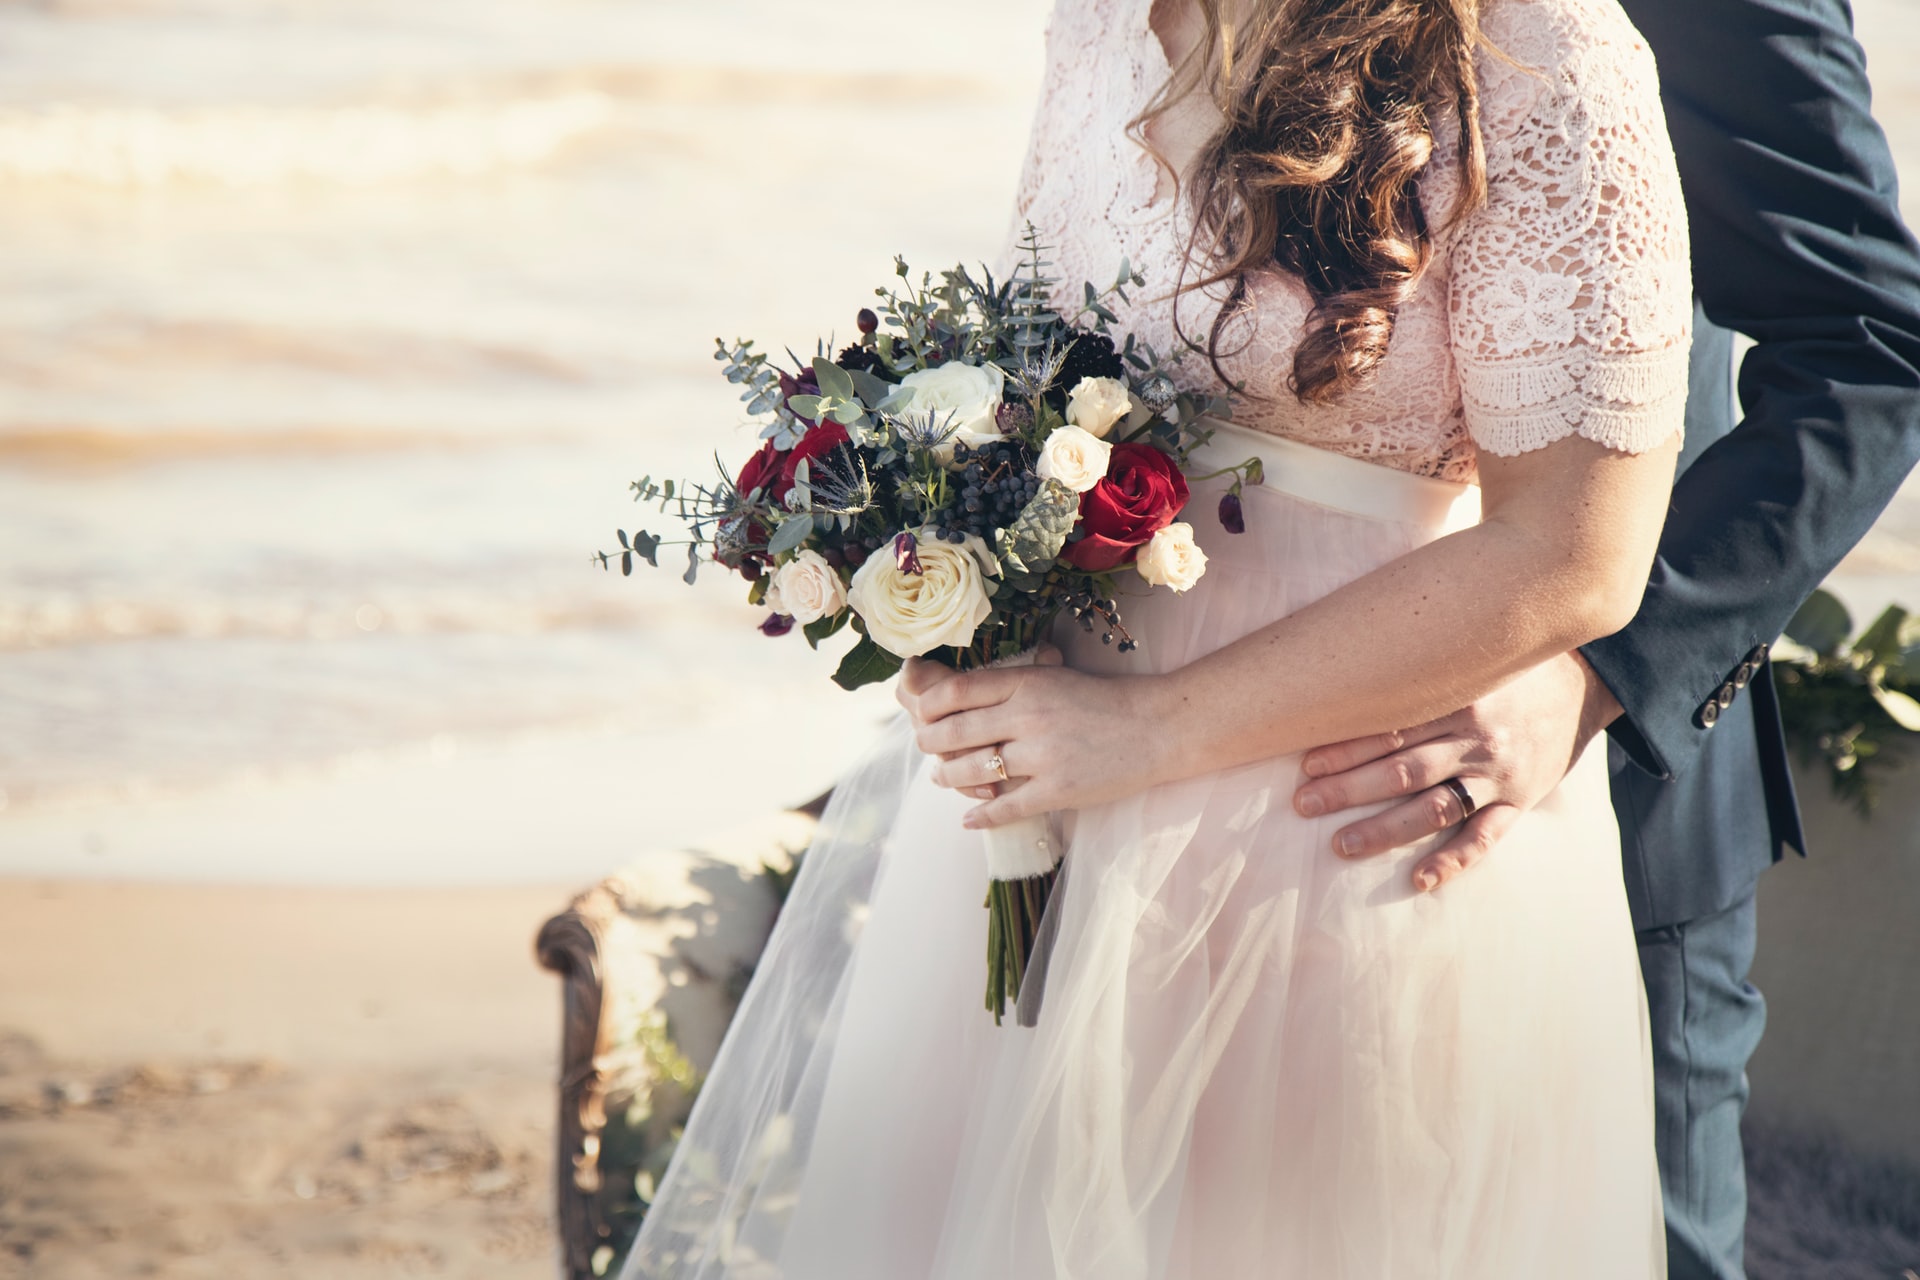 How to Keep a Wedding Dress from Yellowing?